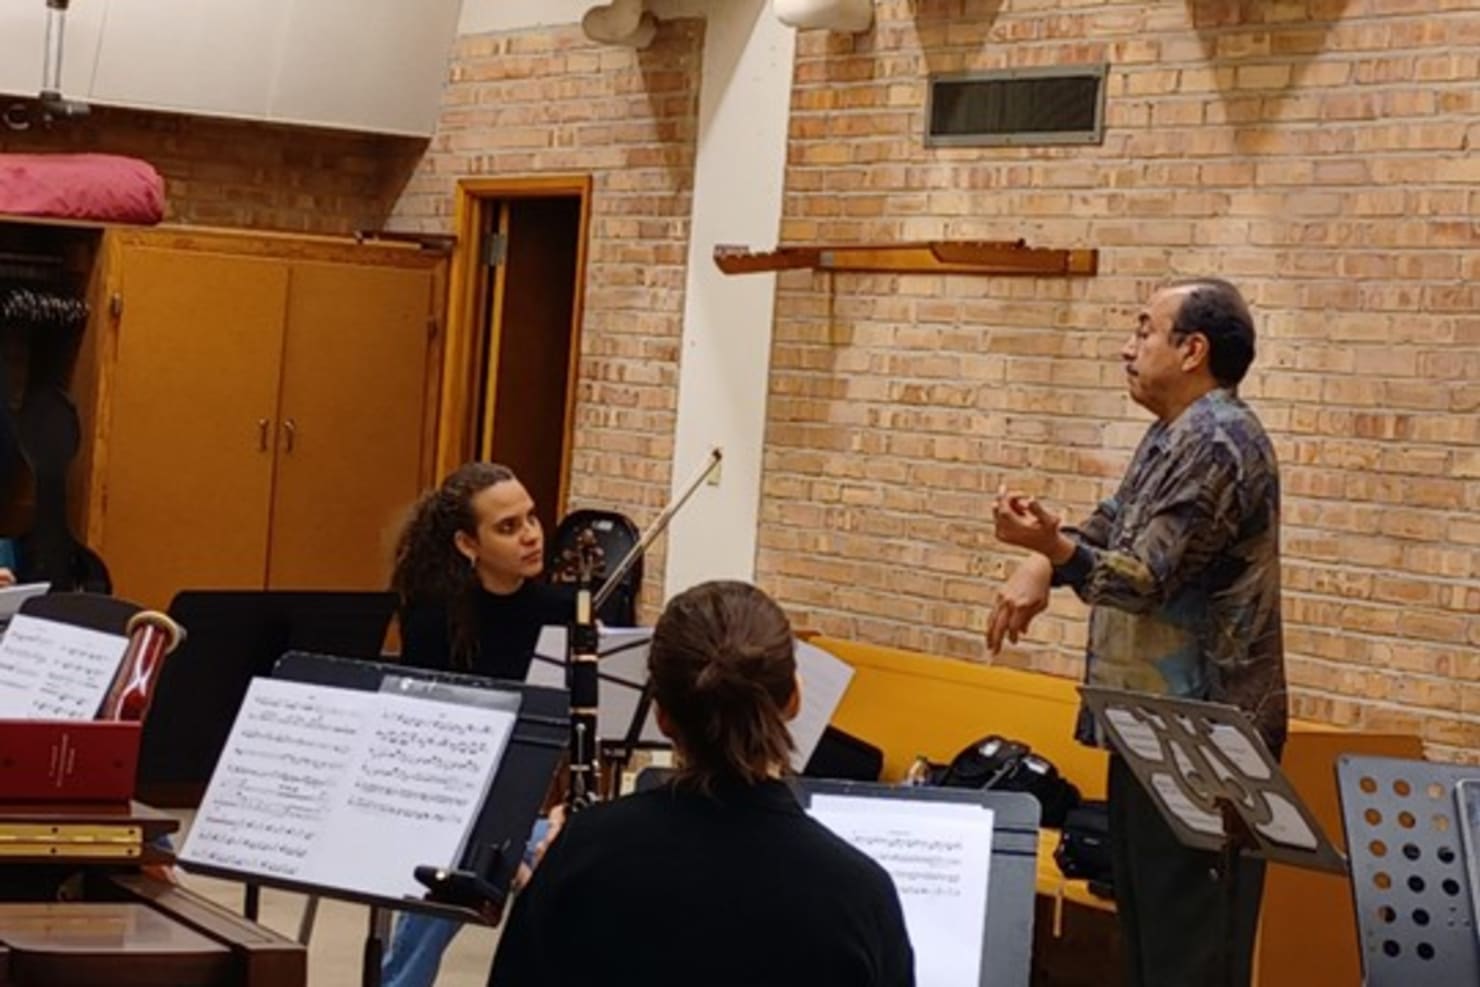 A coaching session with Minnesota Orchestra Principal Trumpet Manny Laureano was a highlight for many of the CAYO musicians.